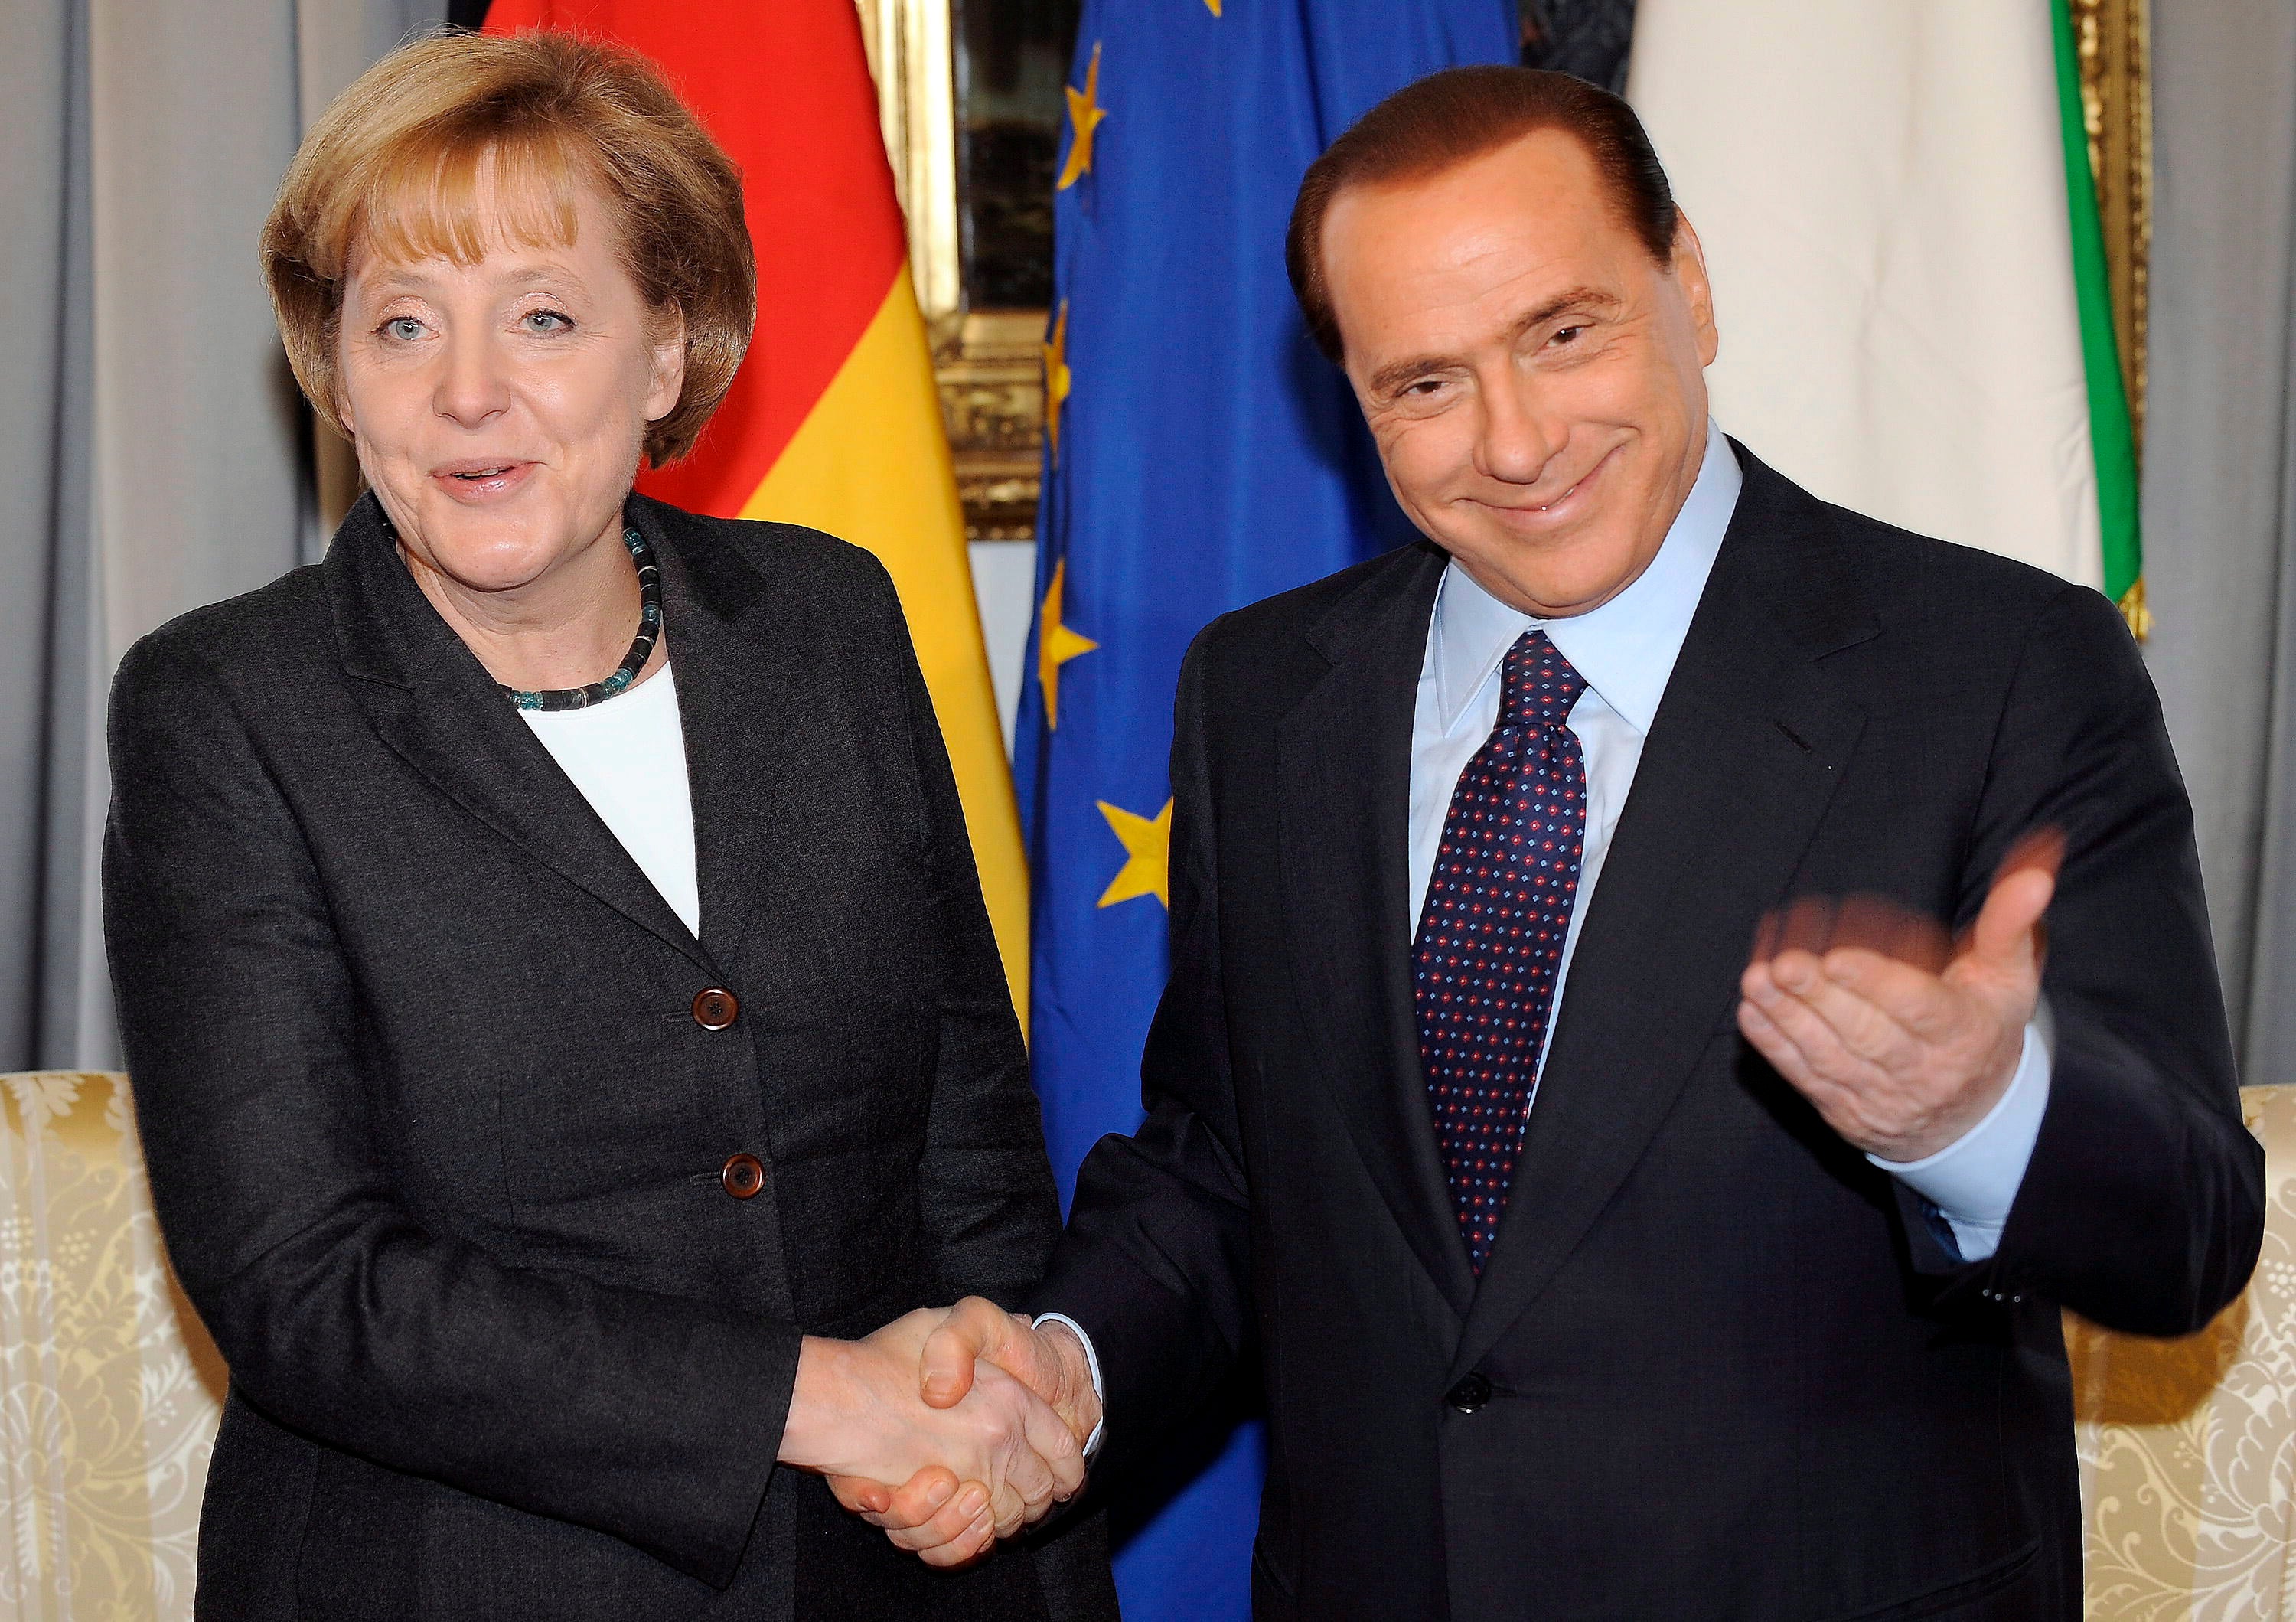 Berlusconi and German chancellor Angela Merkel shake hands during the 2008 Italy-Germany summit in Trieste